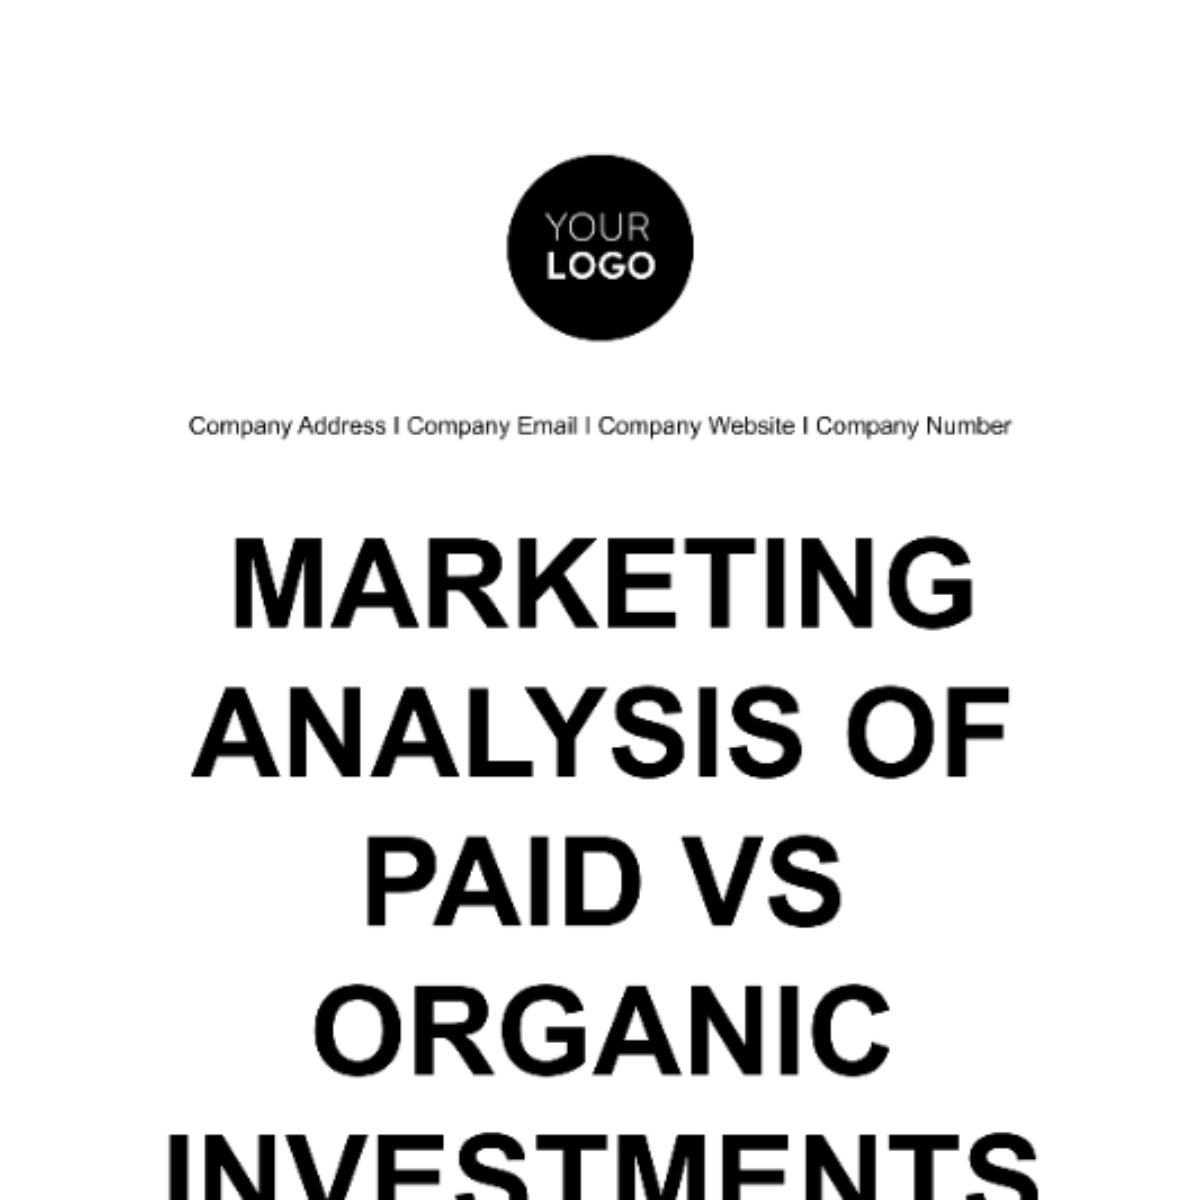 Marketing Analysis of Paid vs Organic Investments Template